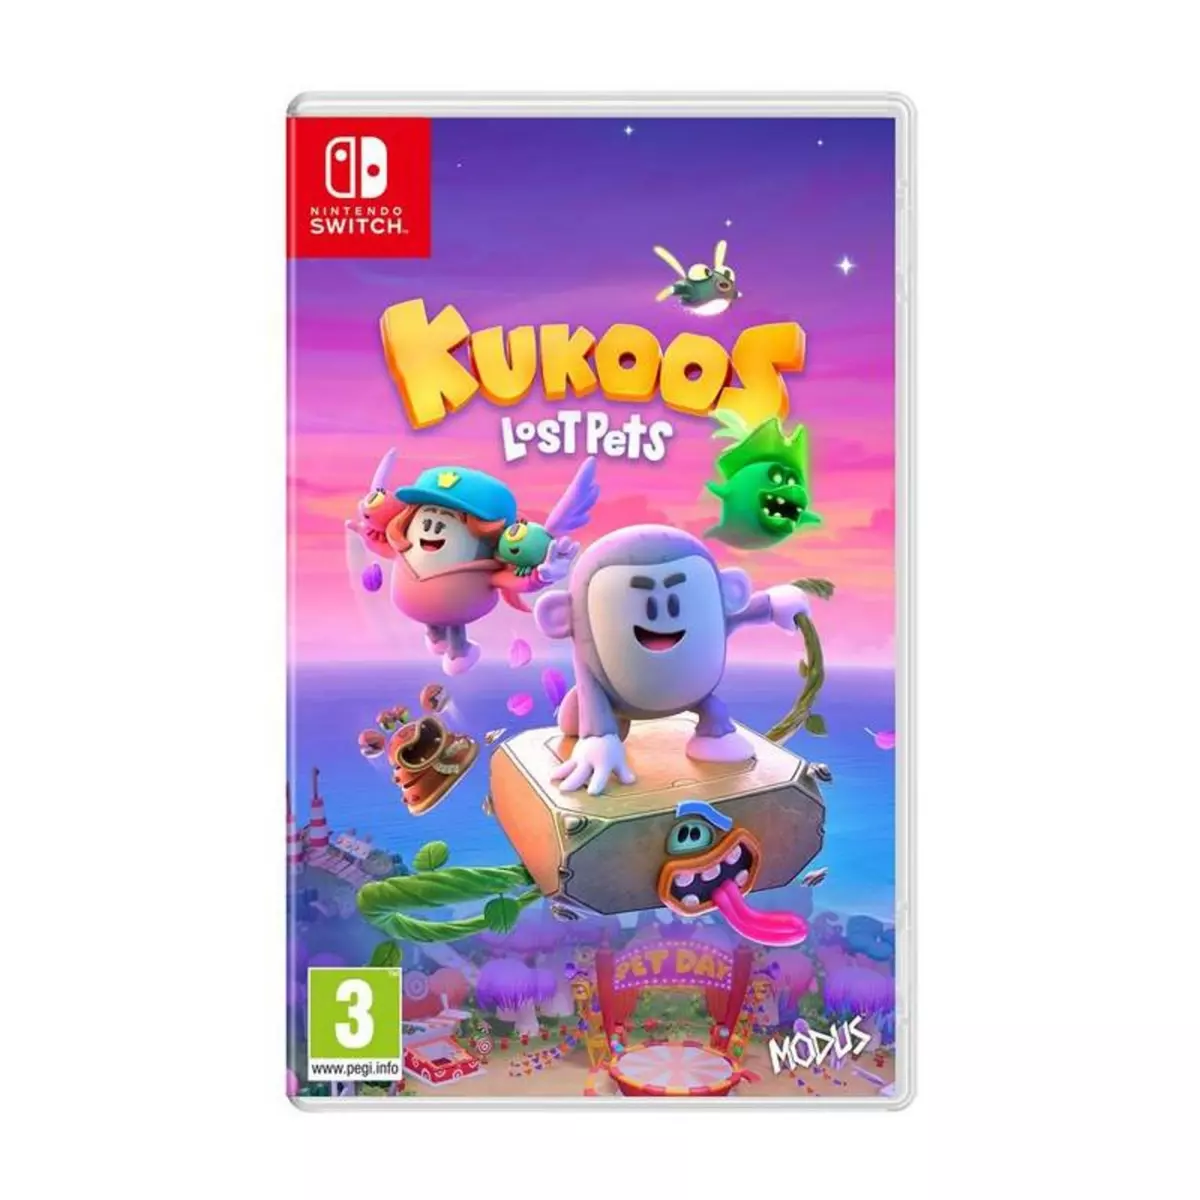 Just for games Kukoos Lost Pets Nintendo Switch